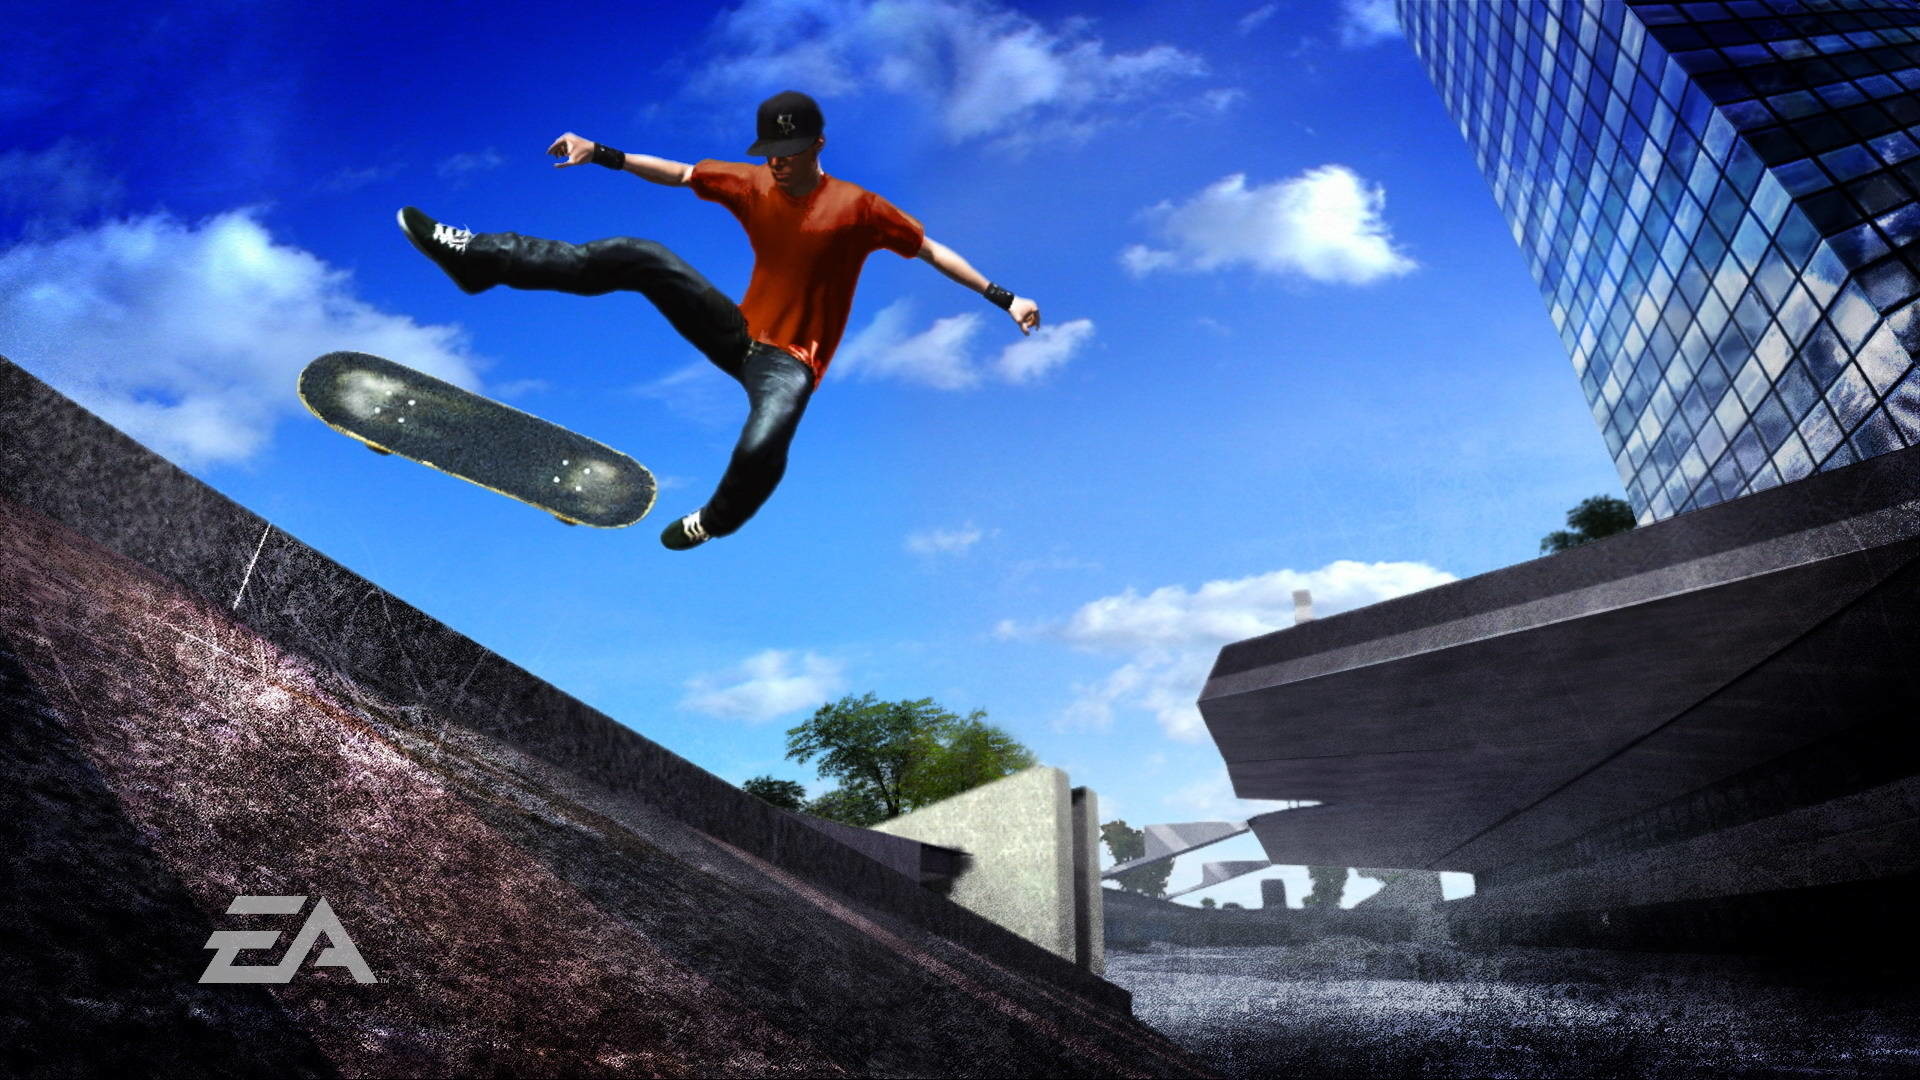 Rusty Extinct interval Skate 3 Wallpaper (74+ pictures)